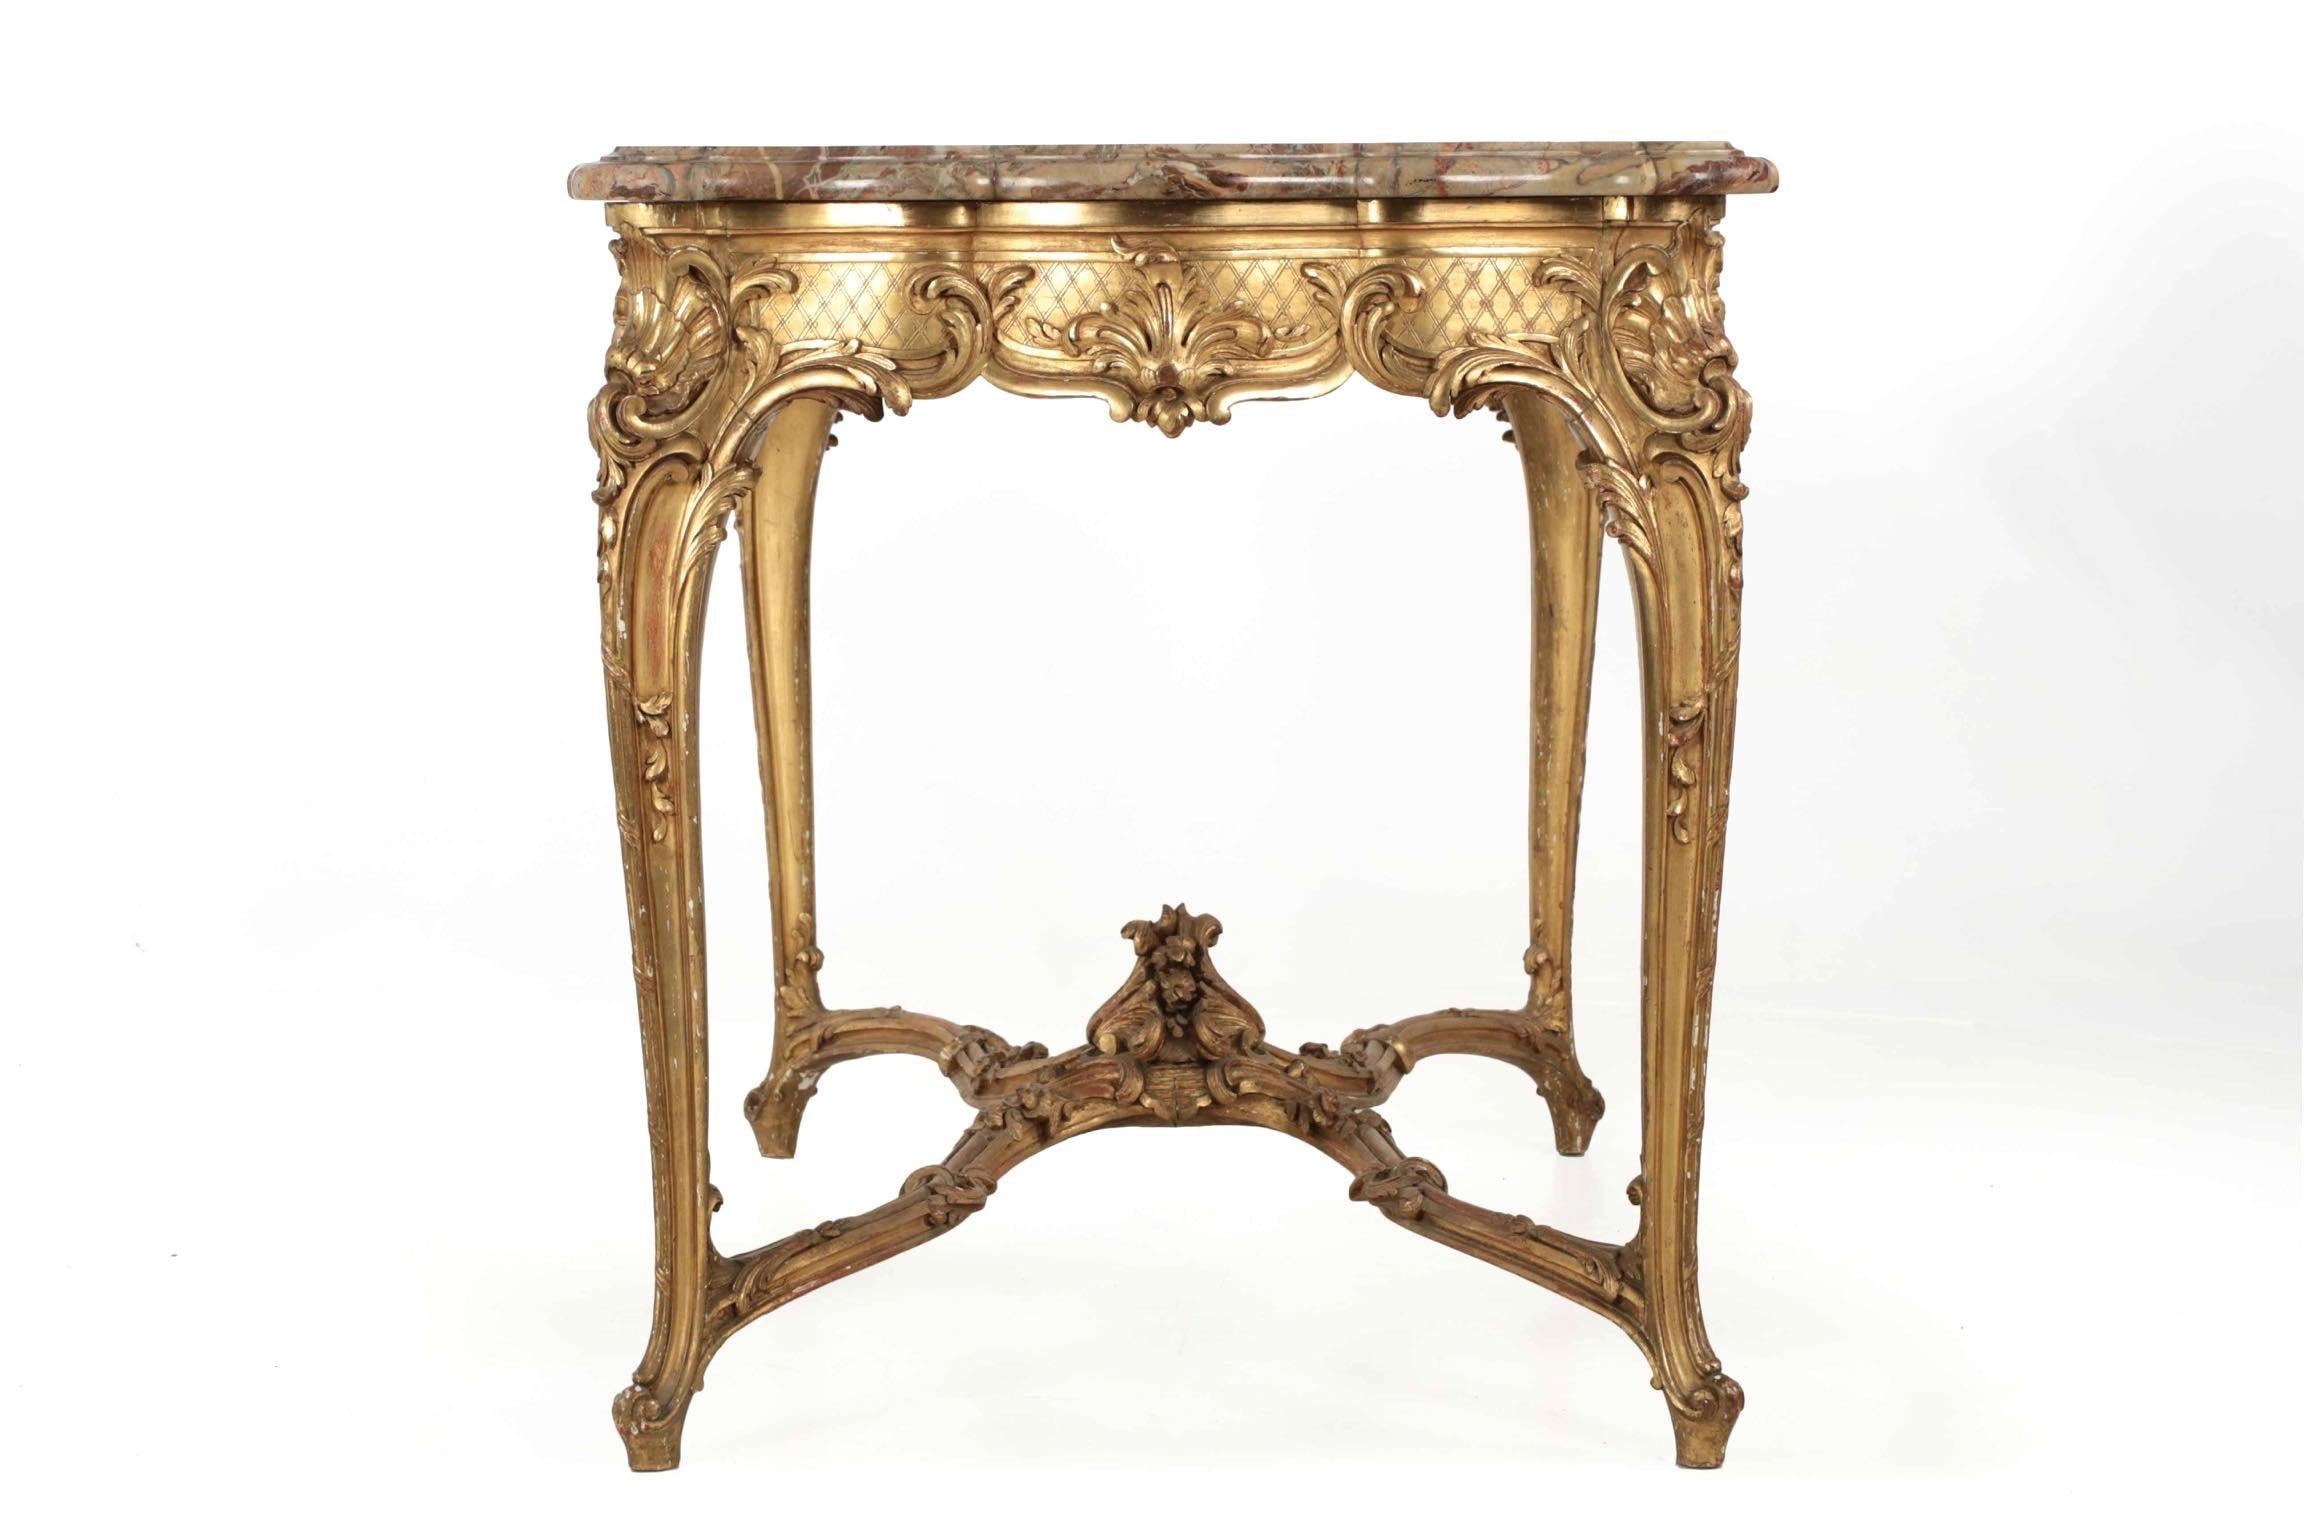 20th Century French Louis XV Style Marble-Top, Giltwood Center Table, Paris, circa 1880